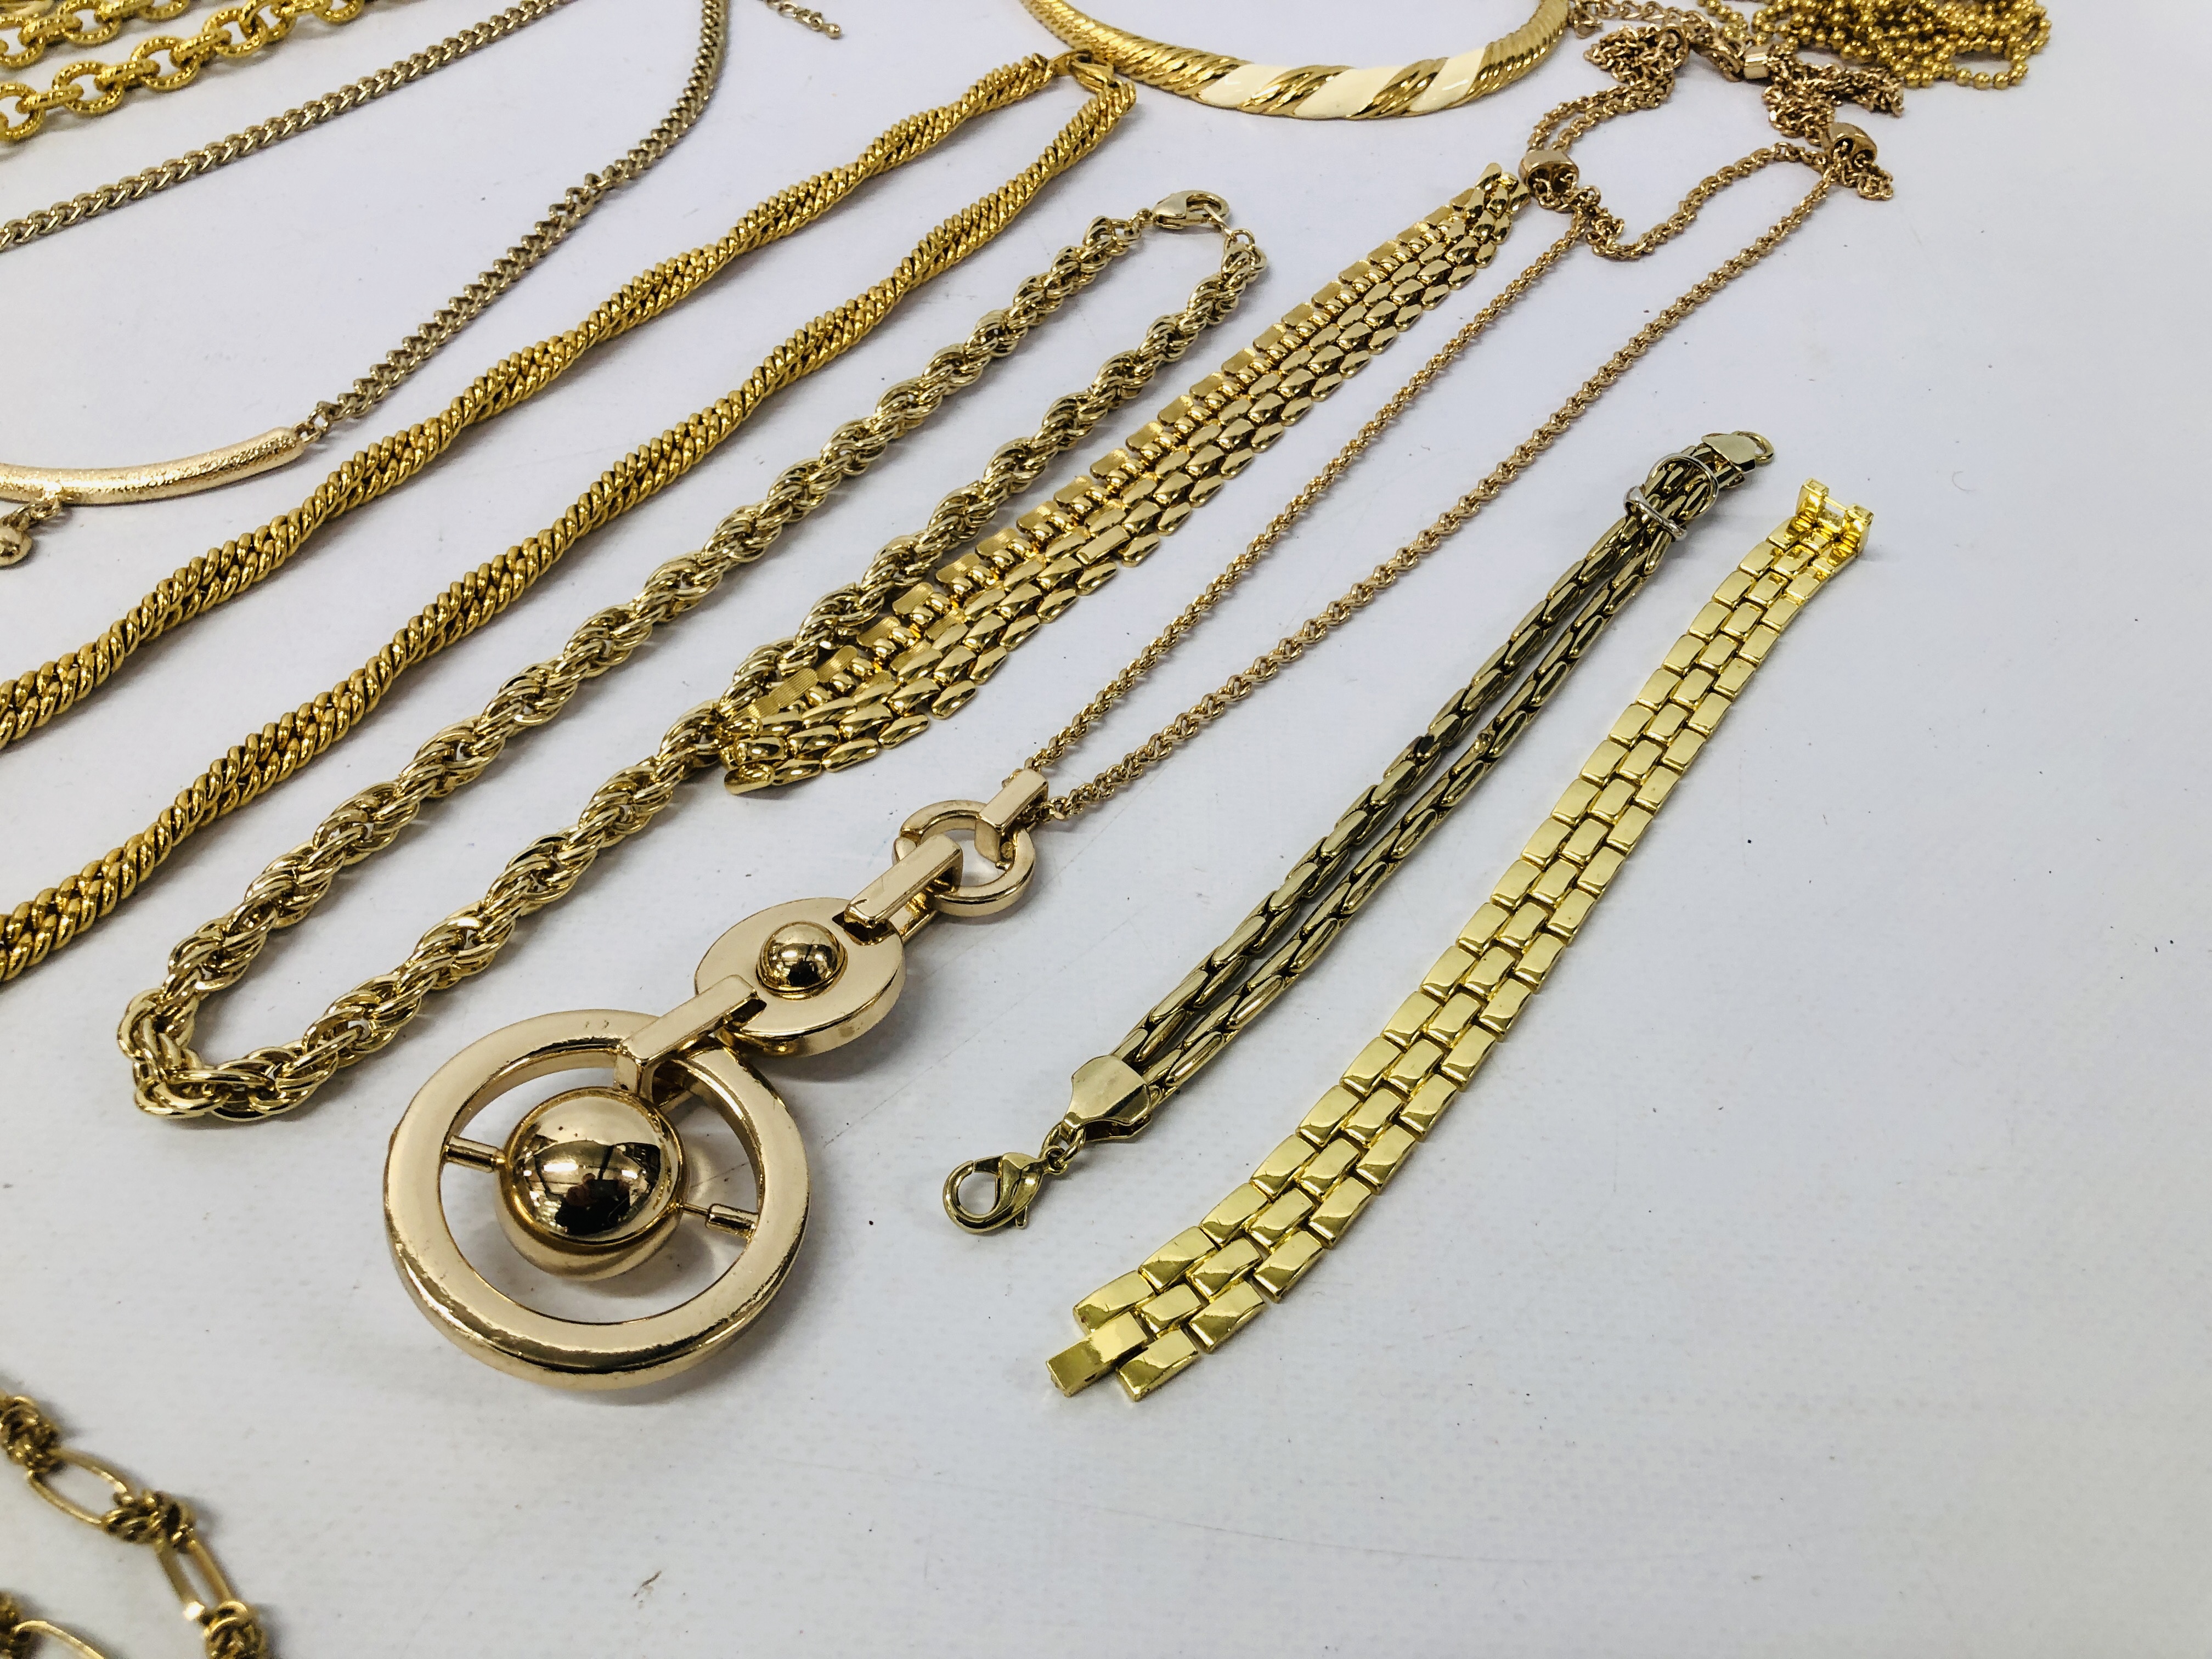 COLLECTION OF DESIGNER COSTUMER JEWELLERY, NECKLACES OF GOLD COLOUR VARIOUS DESIGNS AND LENGTH. - Image 2 of 6